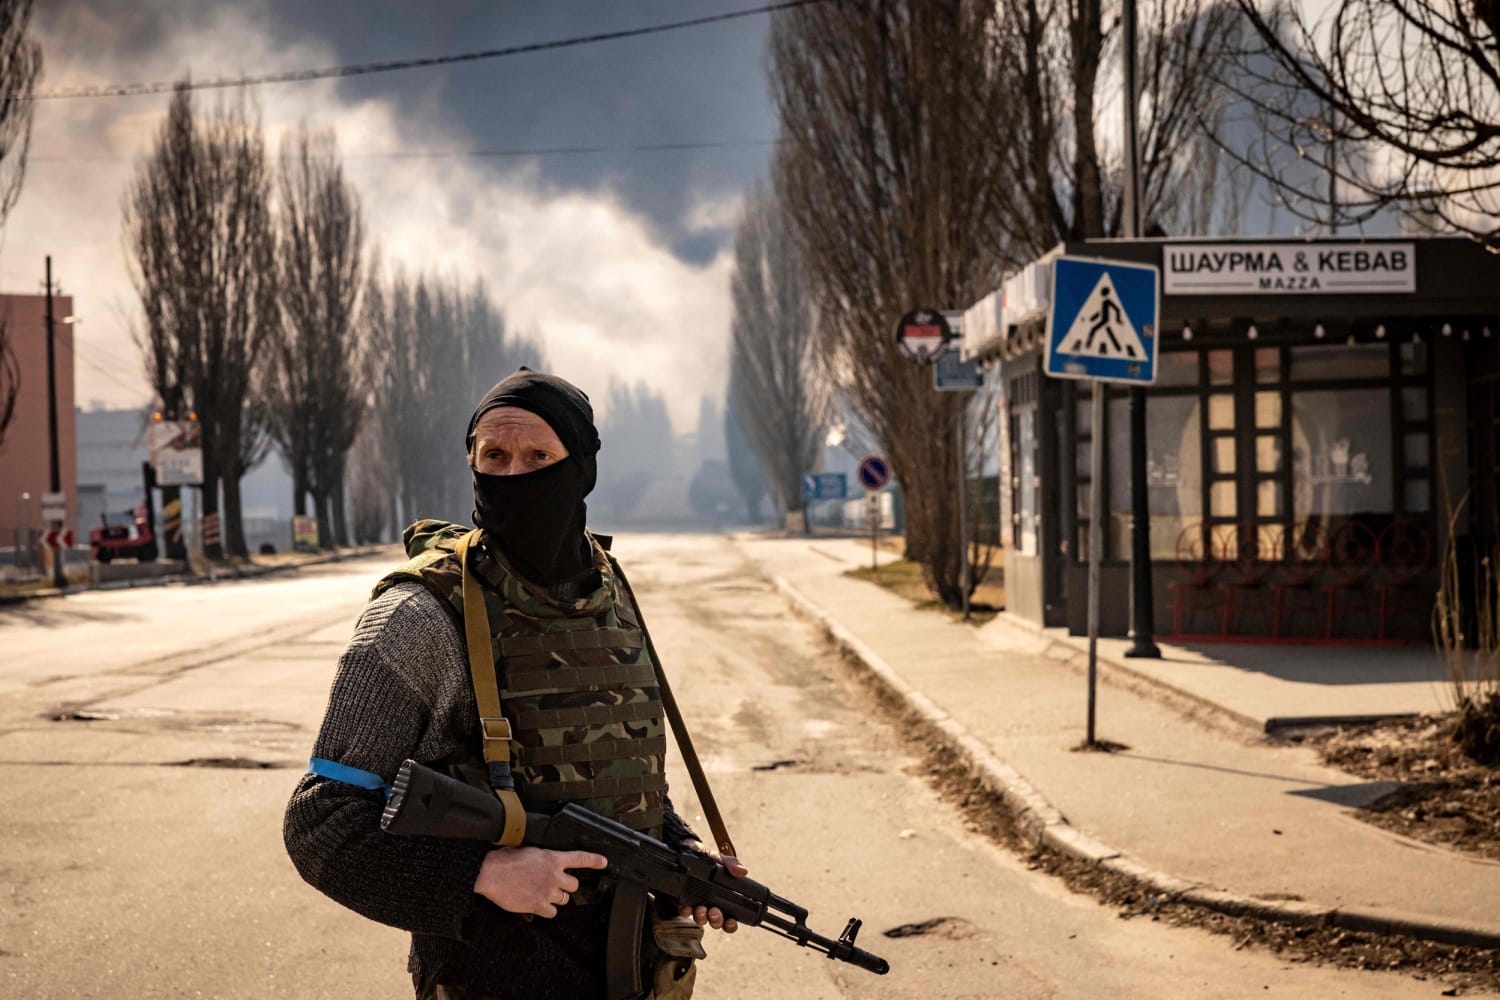 Ukraine tells Russia 'die or surrender' as its Kyiv counterattack drives out invaders